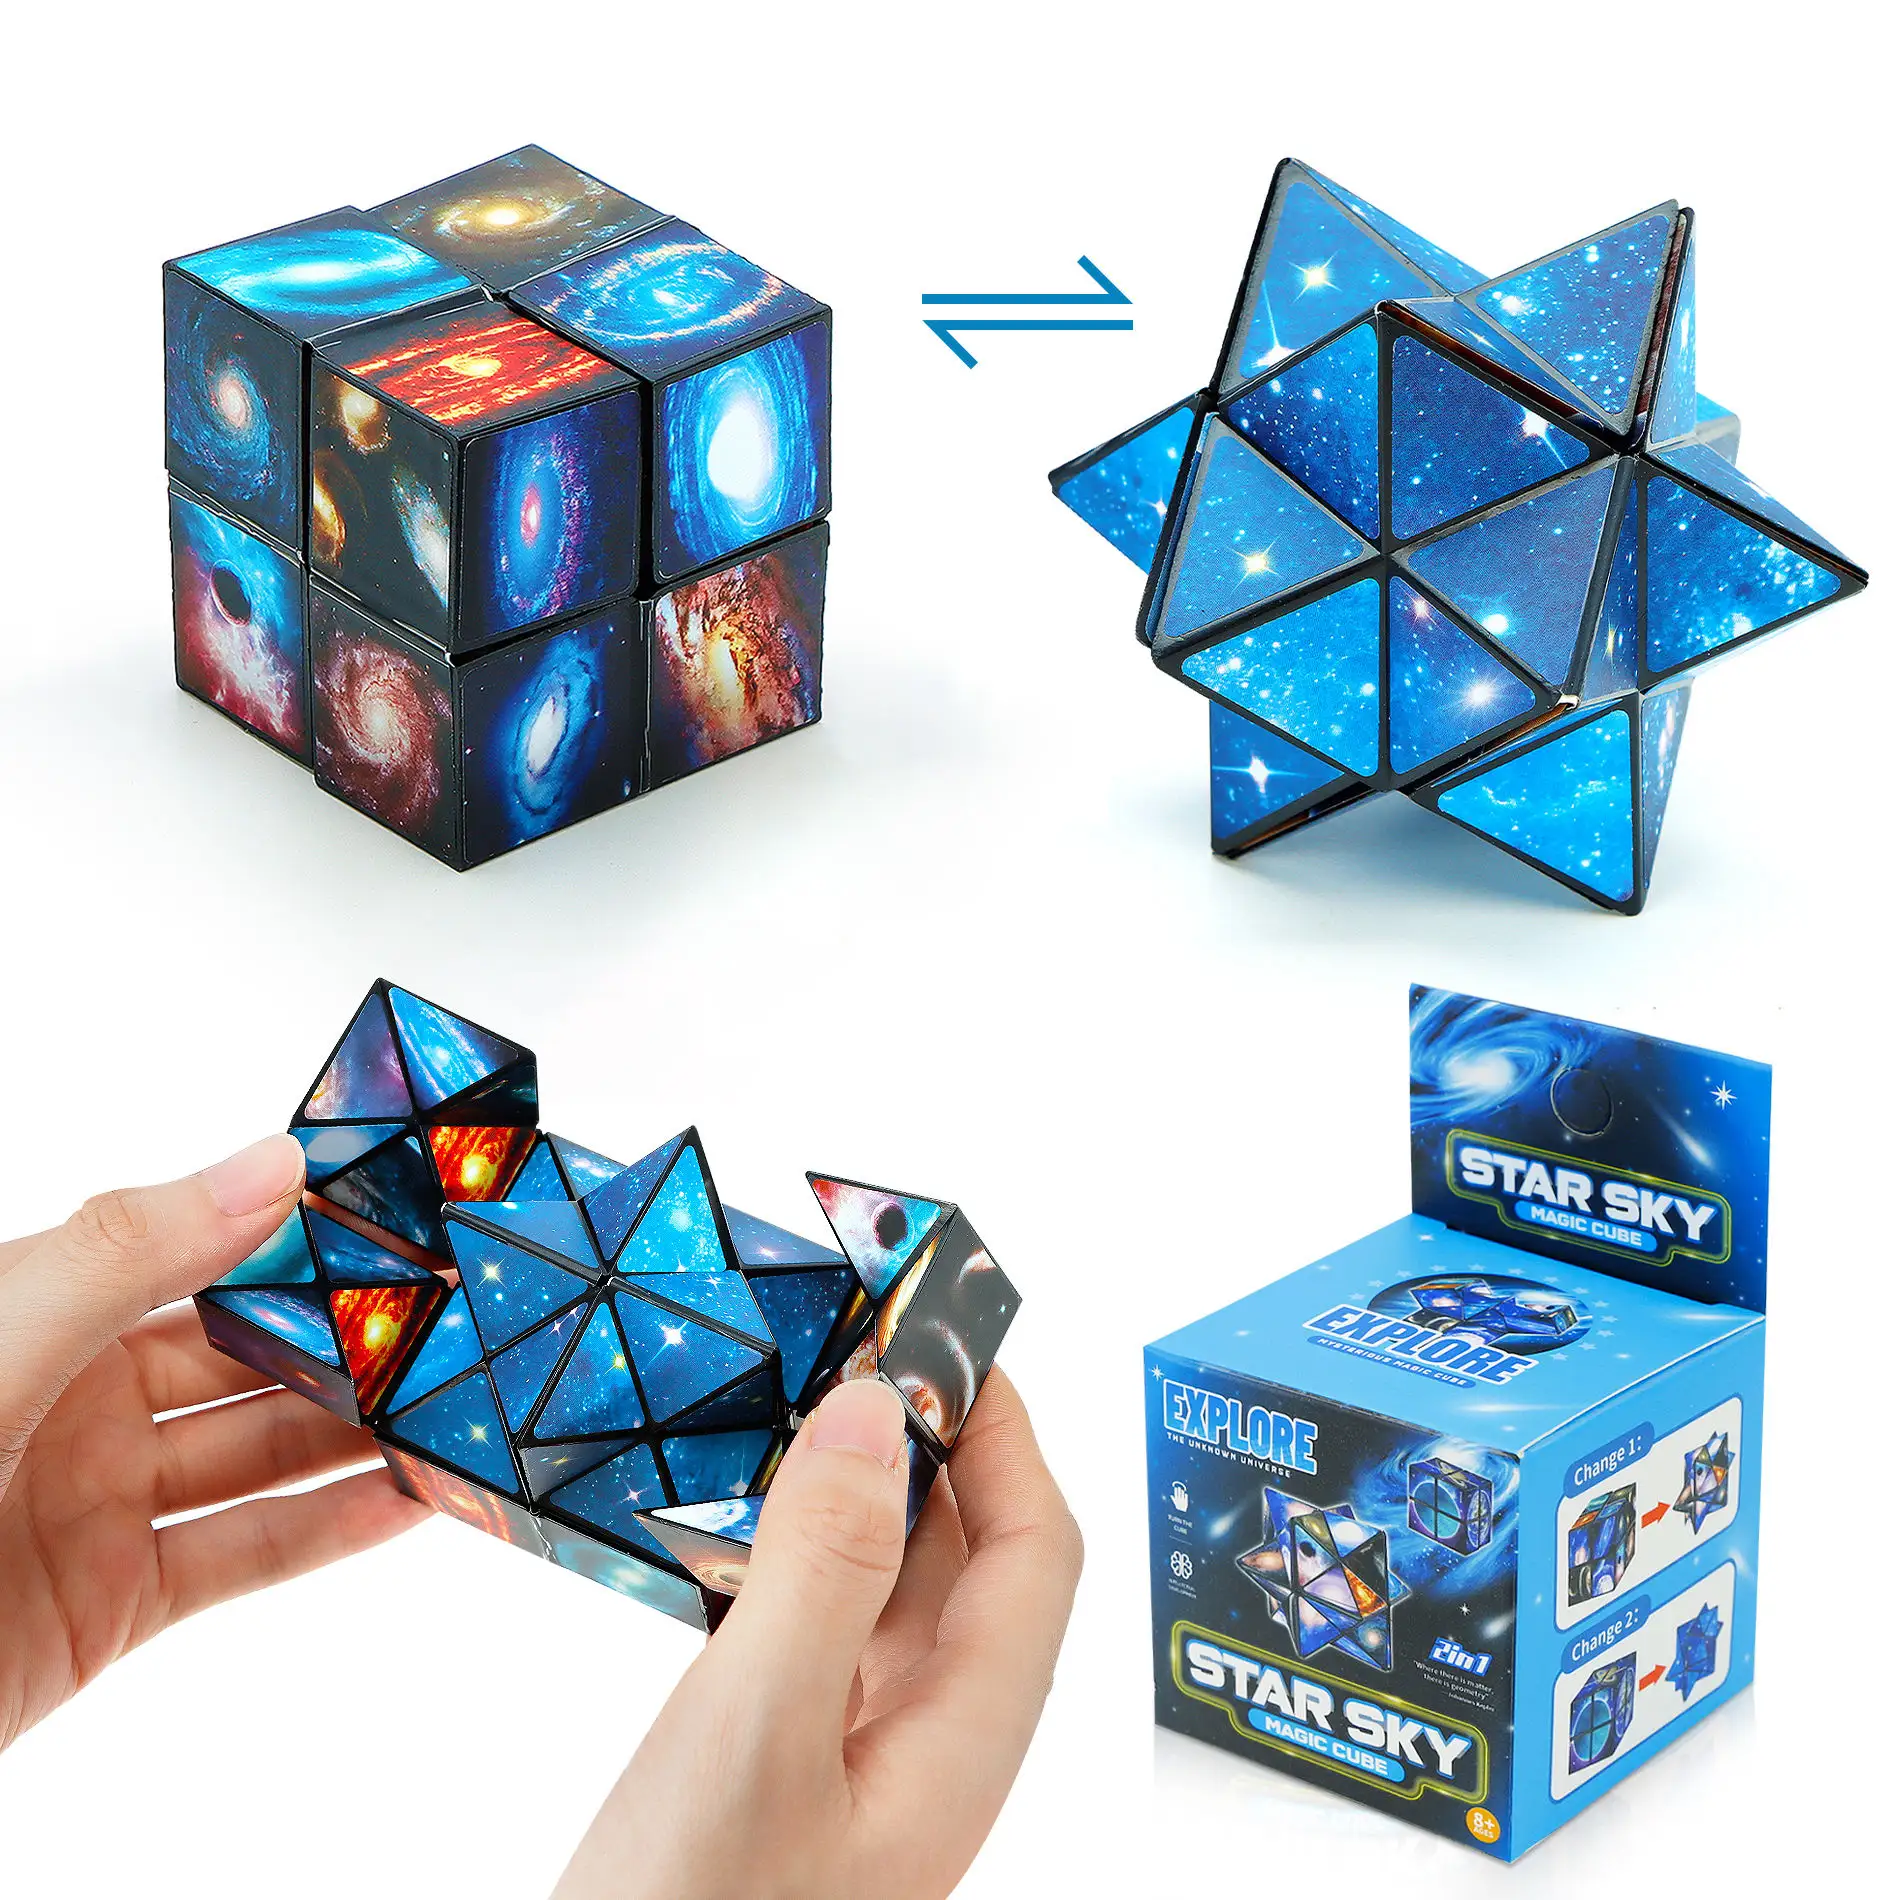 2 in 1 3D Infinity Magic Star Cube Fidget Toy Geometric Distortion Stress Relief Infinity Cube Toy Shape Shifting Box